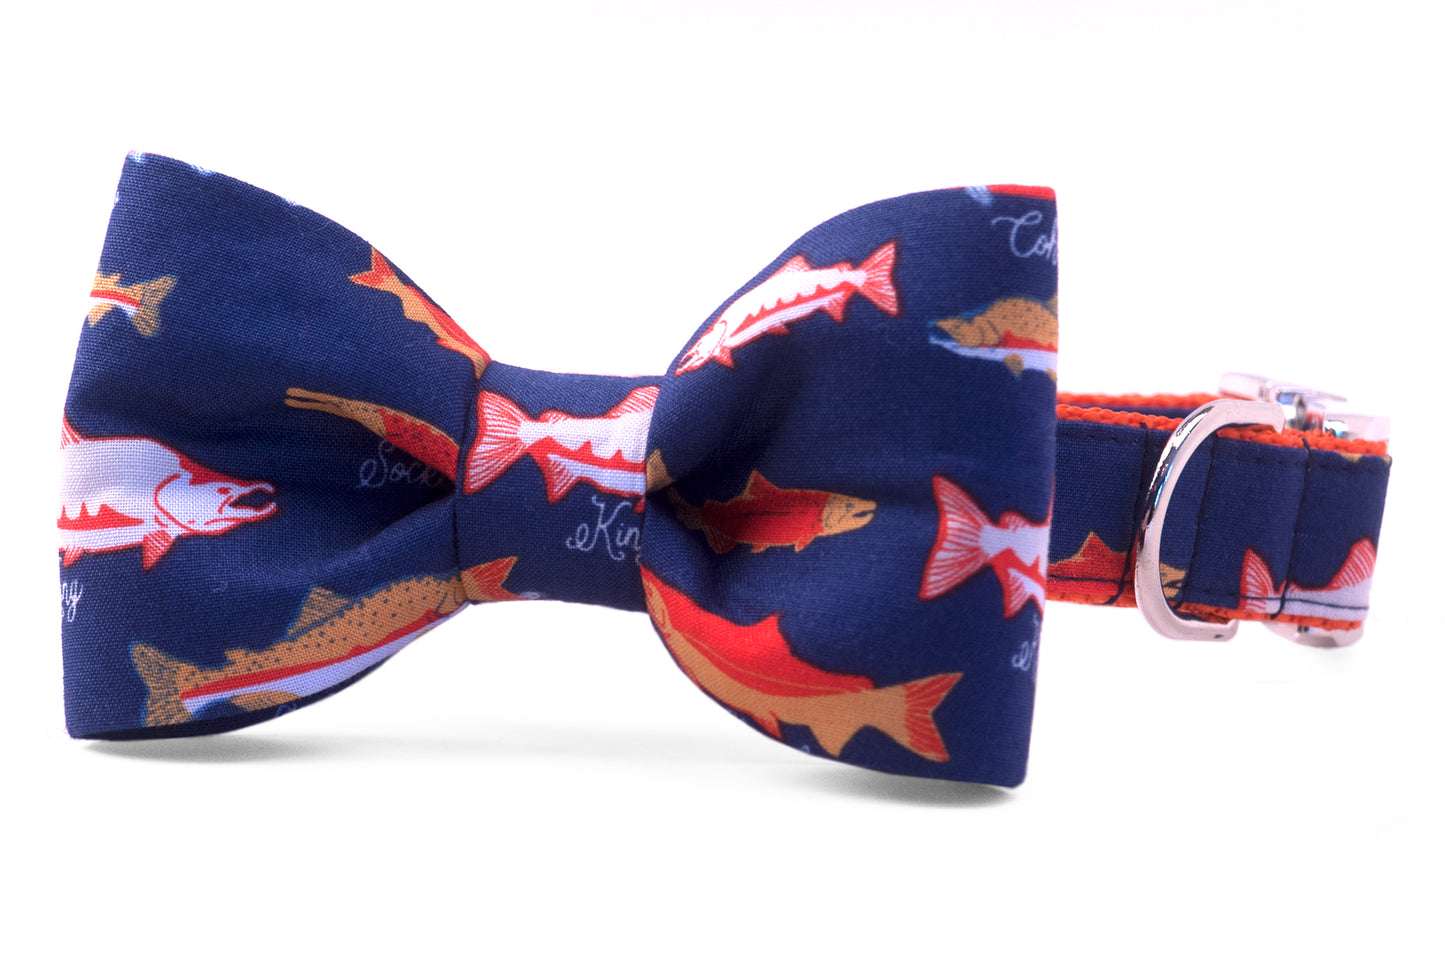 Catch of the Day Bow Tie Dog Collar - Crew LaLa